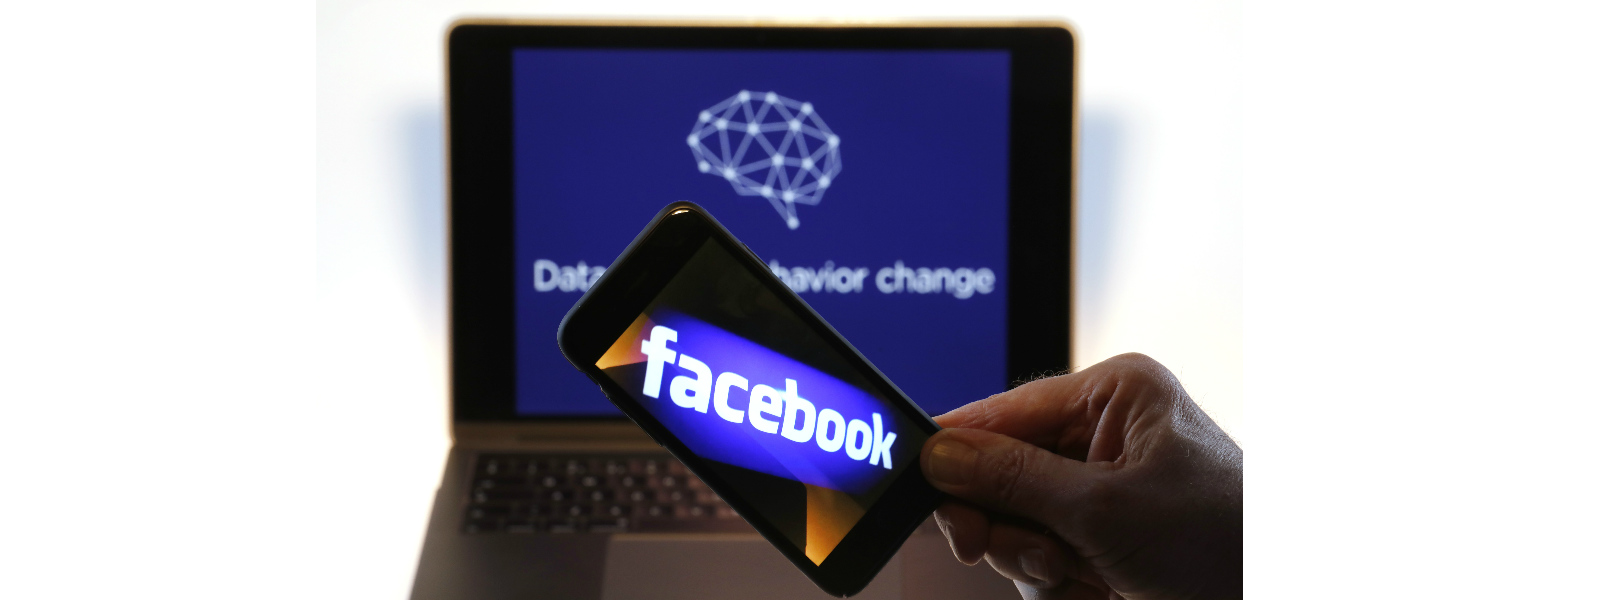 FB suspends 200 apps over possible data misuse